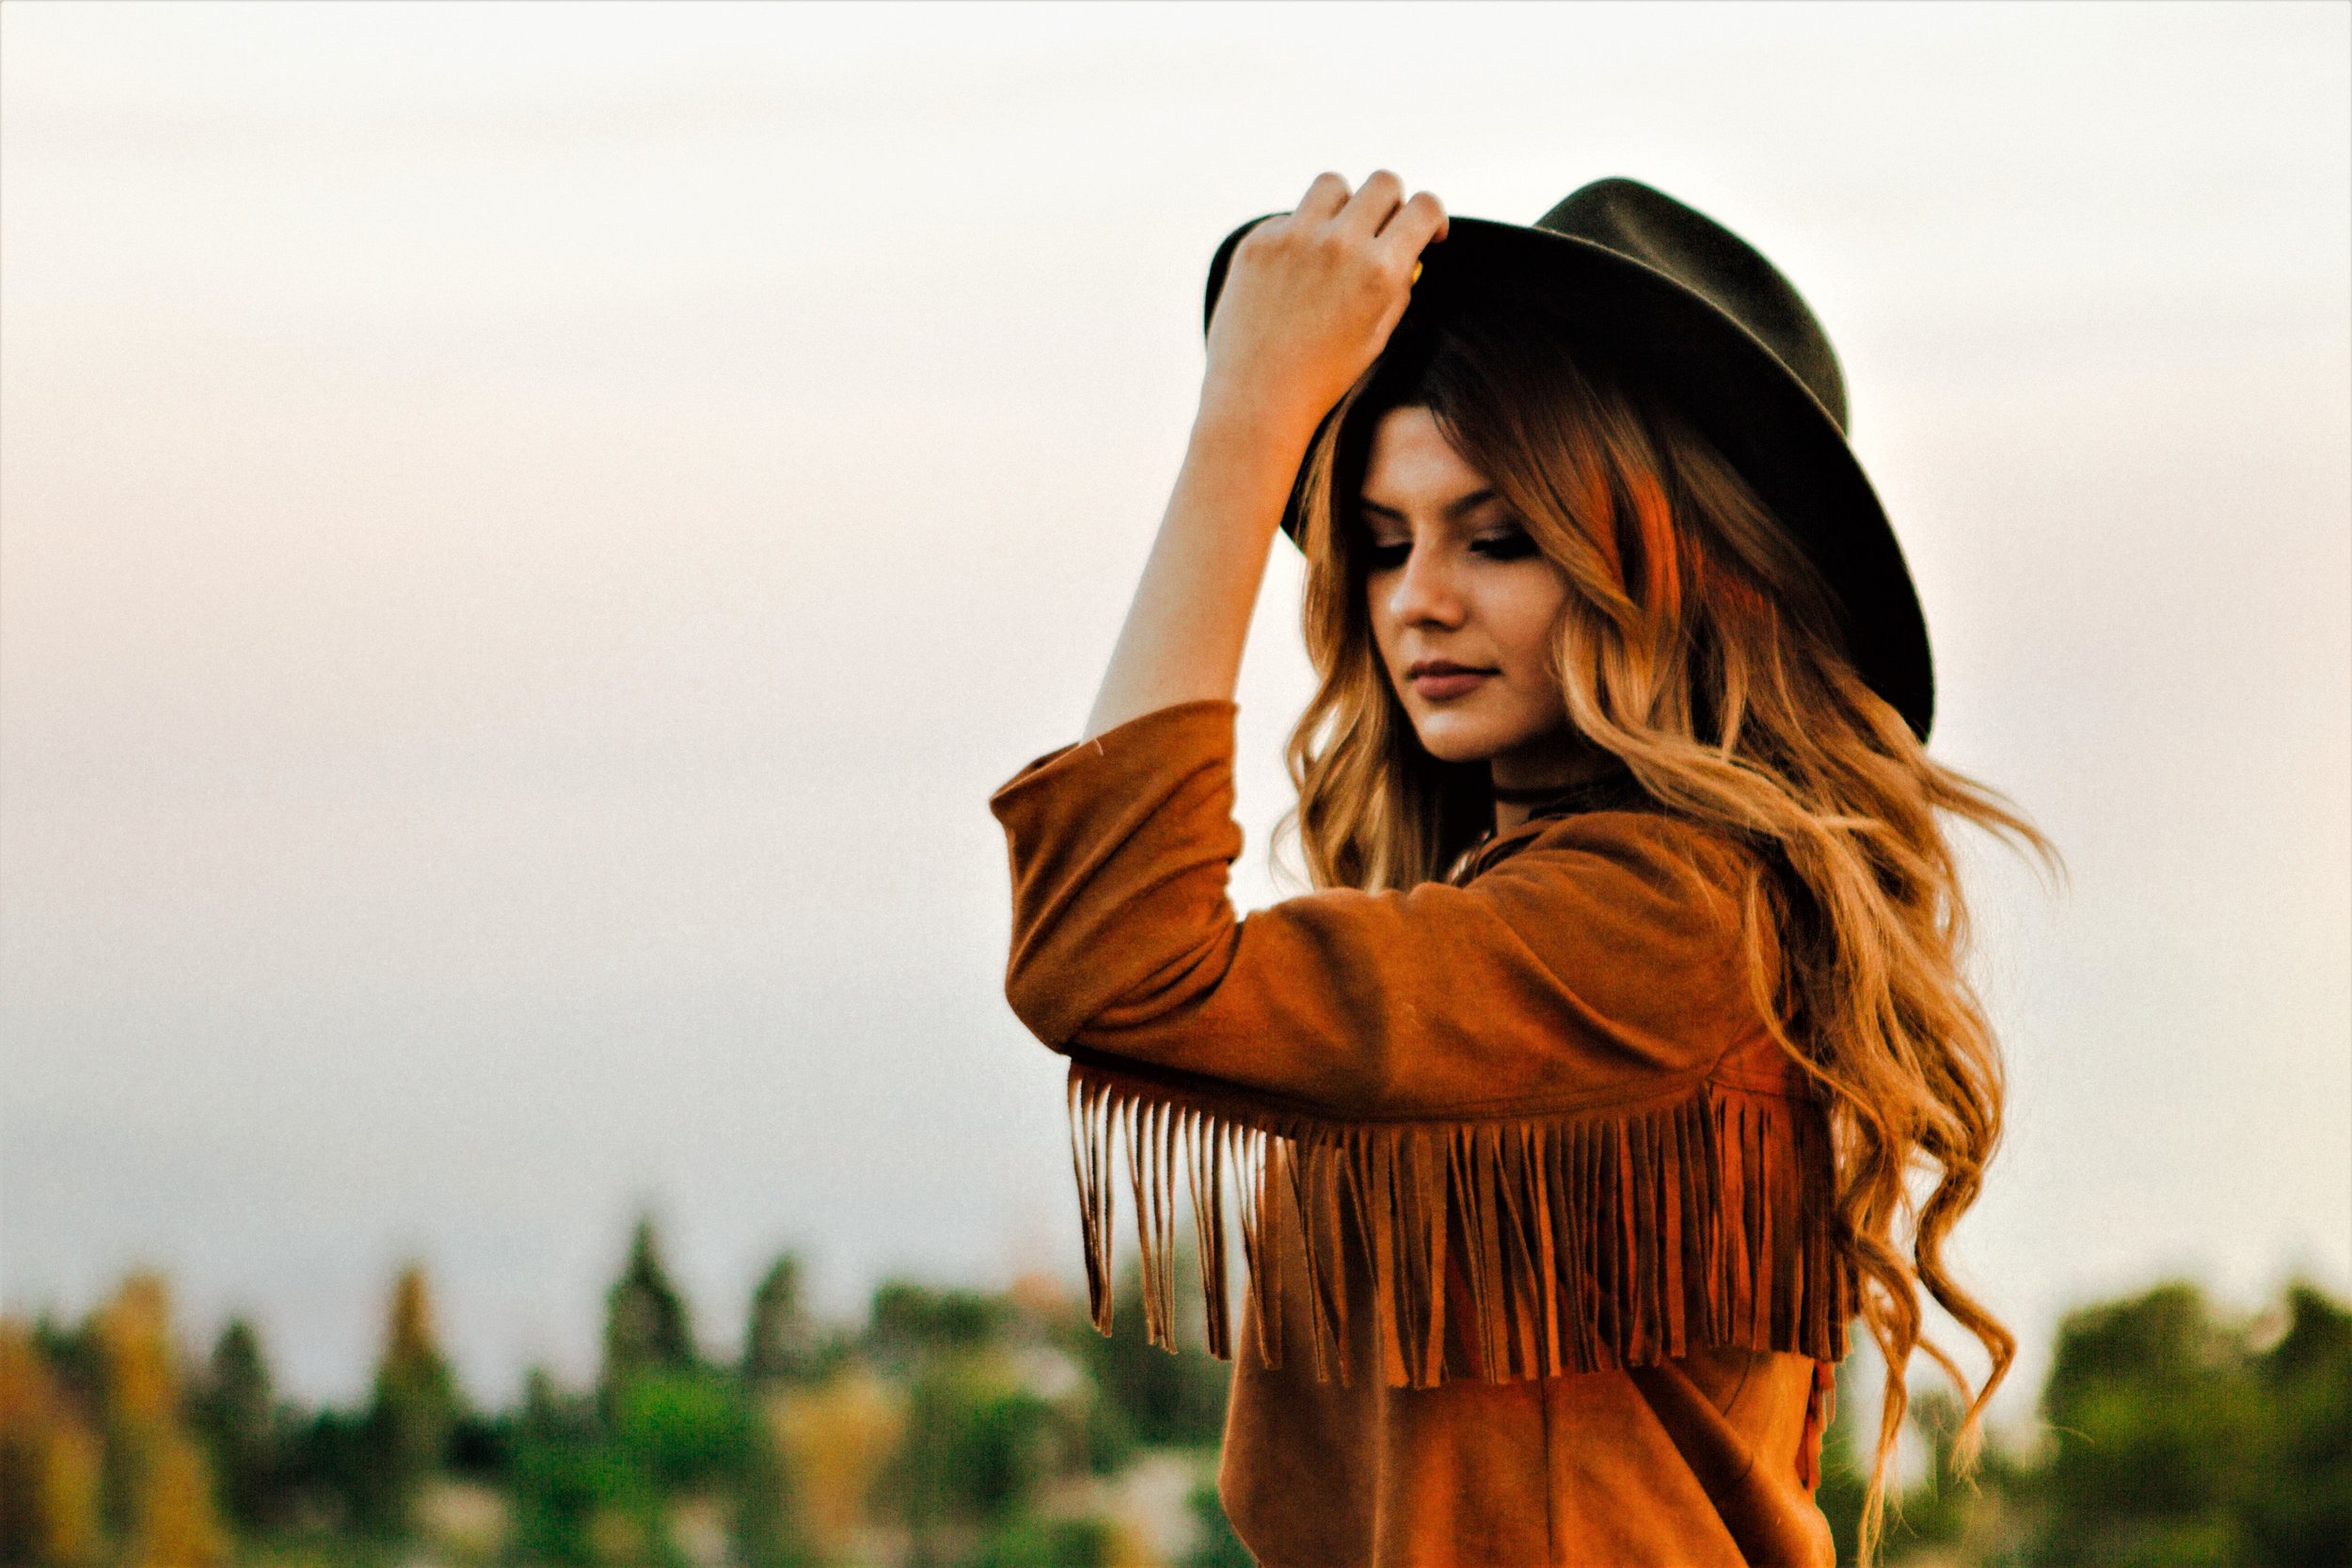 Cowgirl in hat and fringe jacket